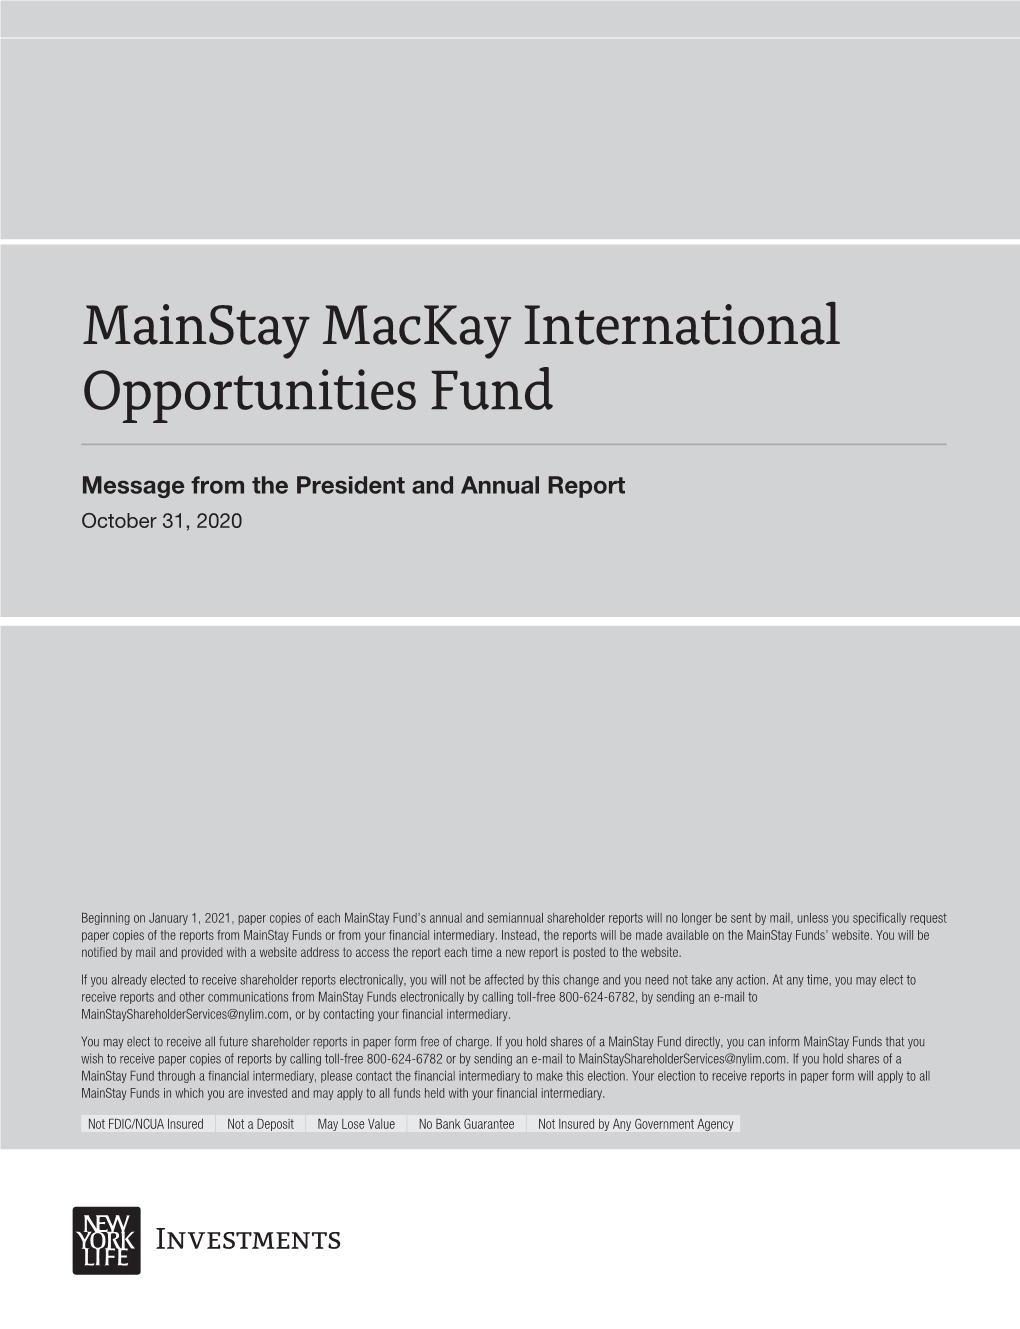 Mainstay Mackay International Opportunities Fund Annual Report